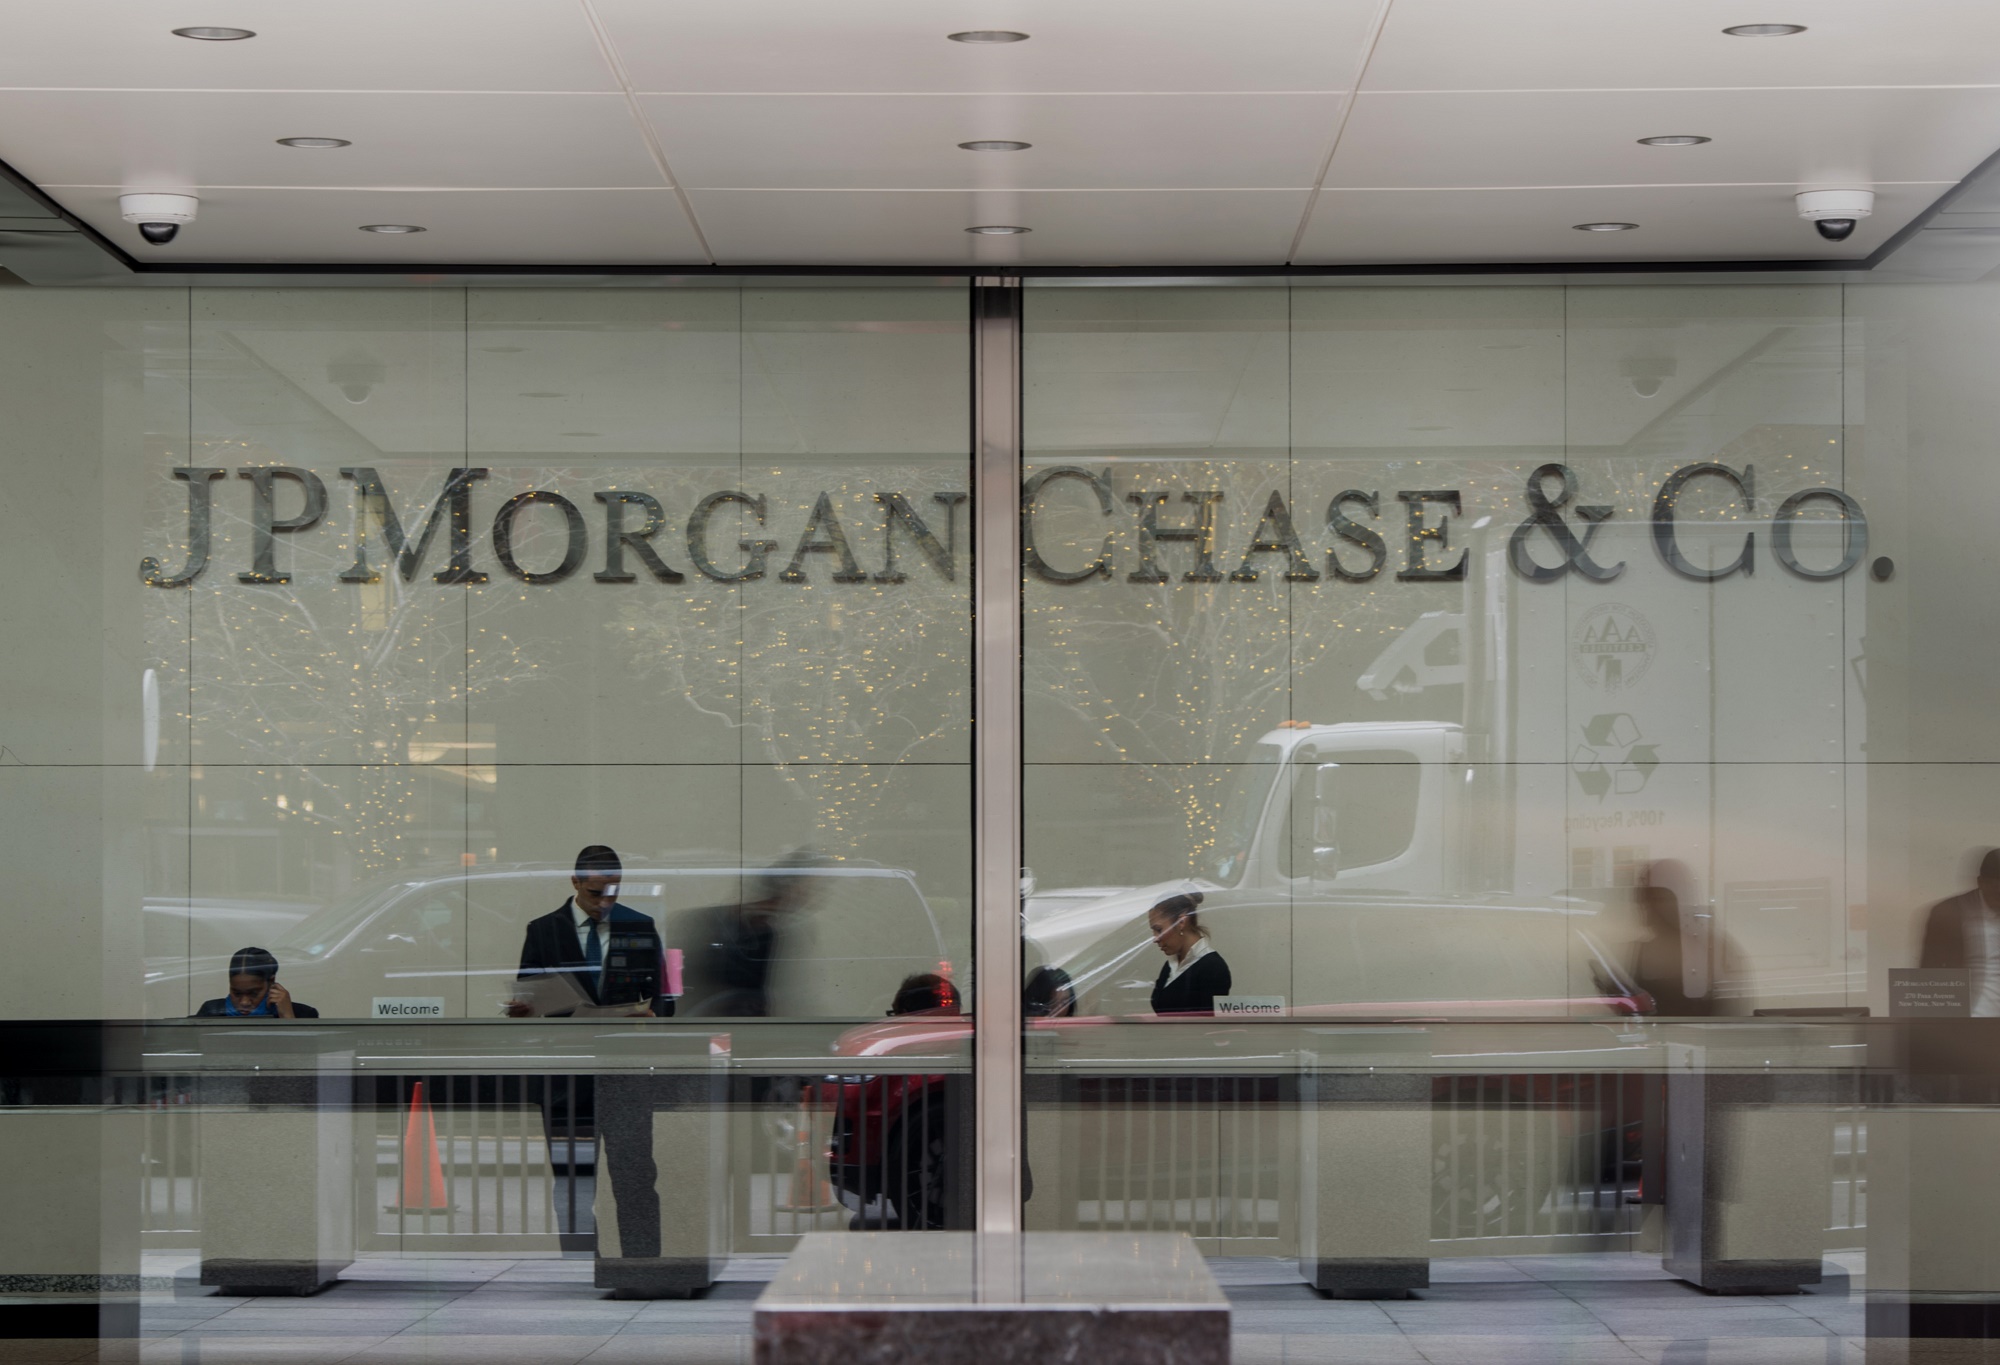 The headquarters of JP Morgan Chase and Co. in New York City.
